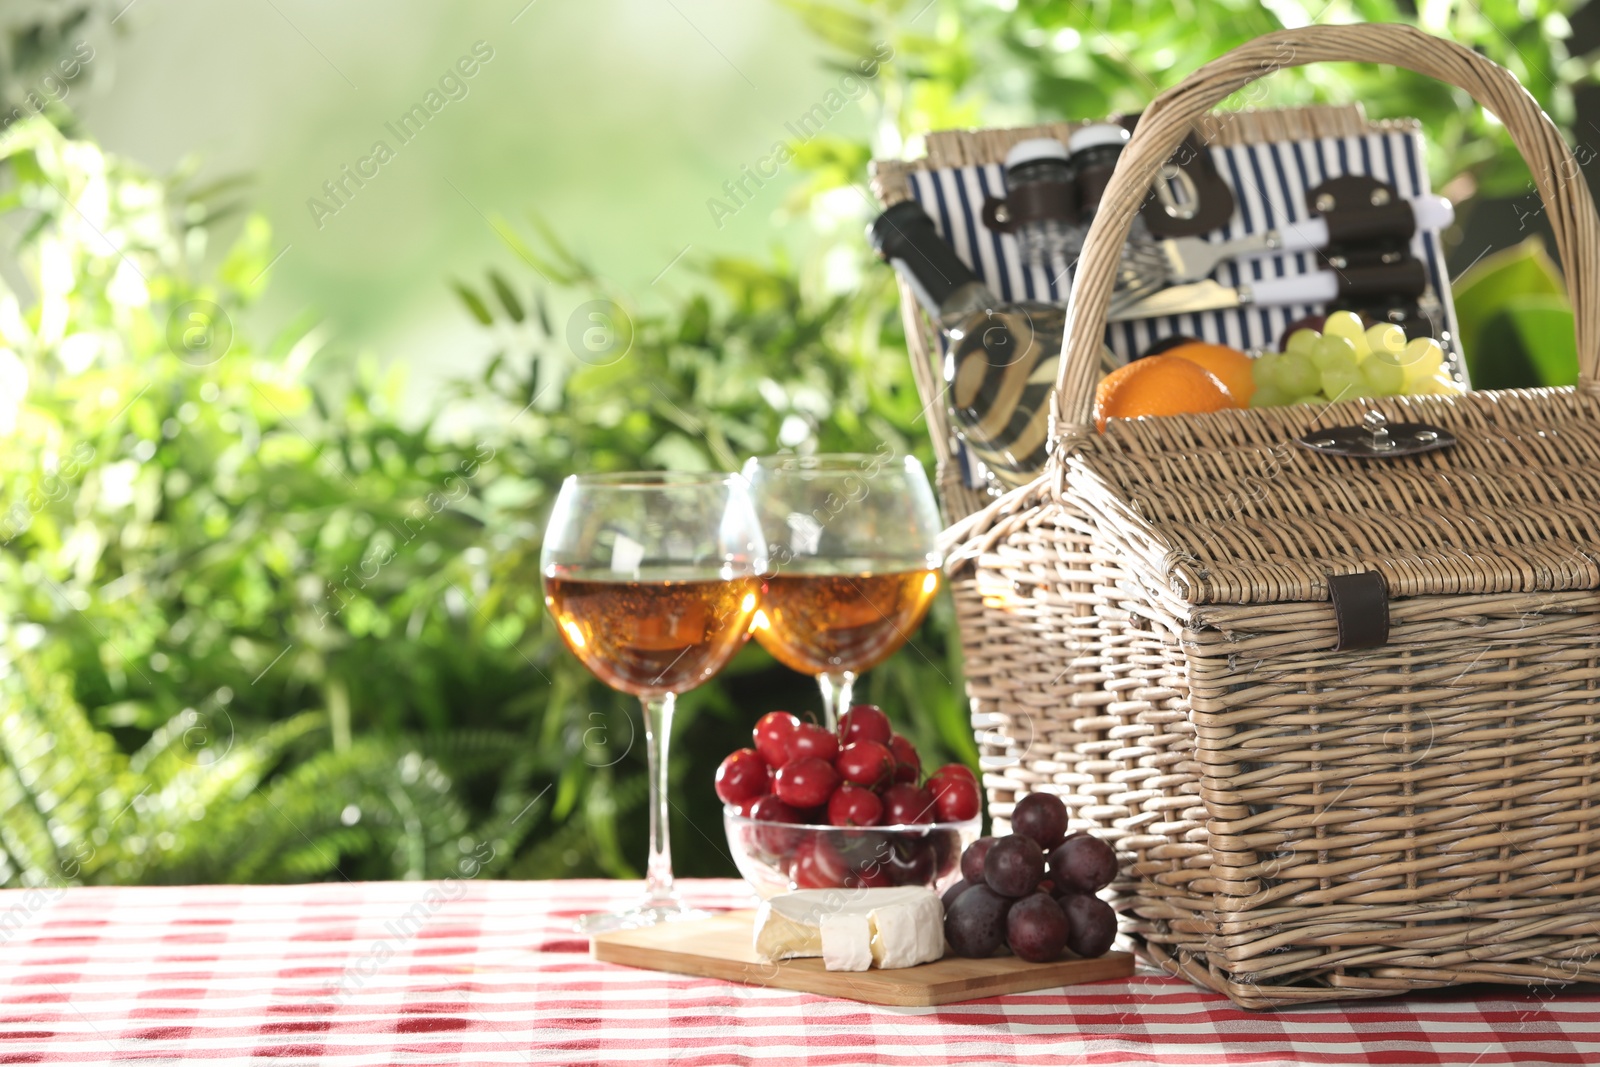 Photo of Wicker picnic basket with different products on checkered tablecloth against blurred background, space for text